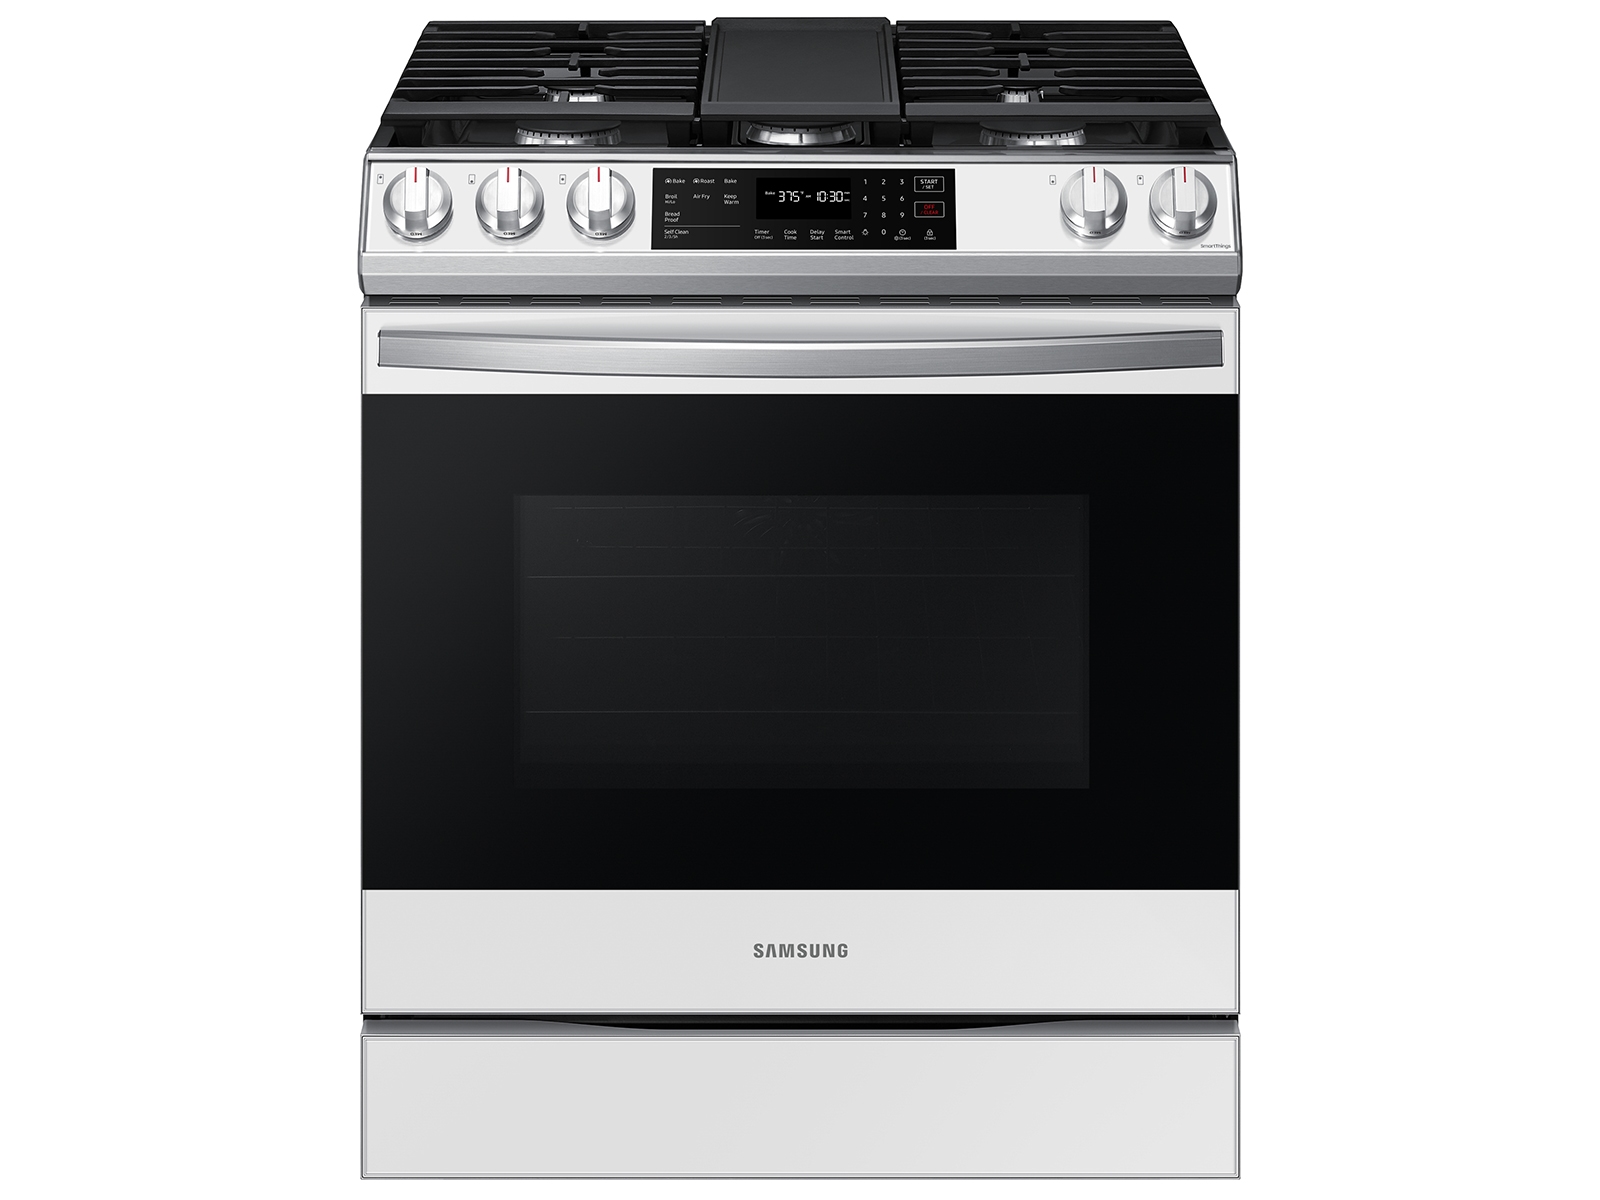 Photos - Cooker Samsung Bespoke 6.0 cu. ft. Smart Slide-in Gas Range with Air Fry & Convec 